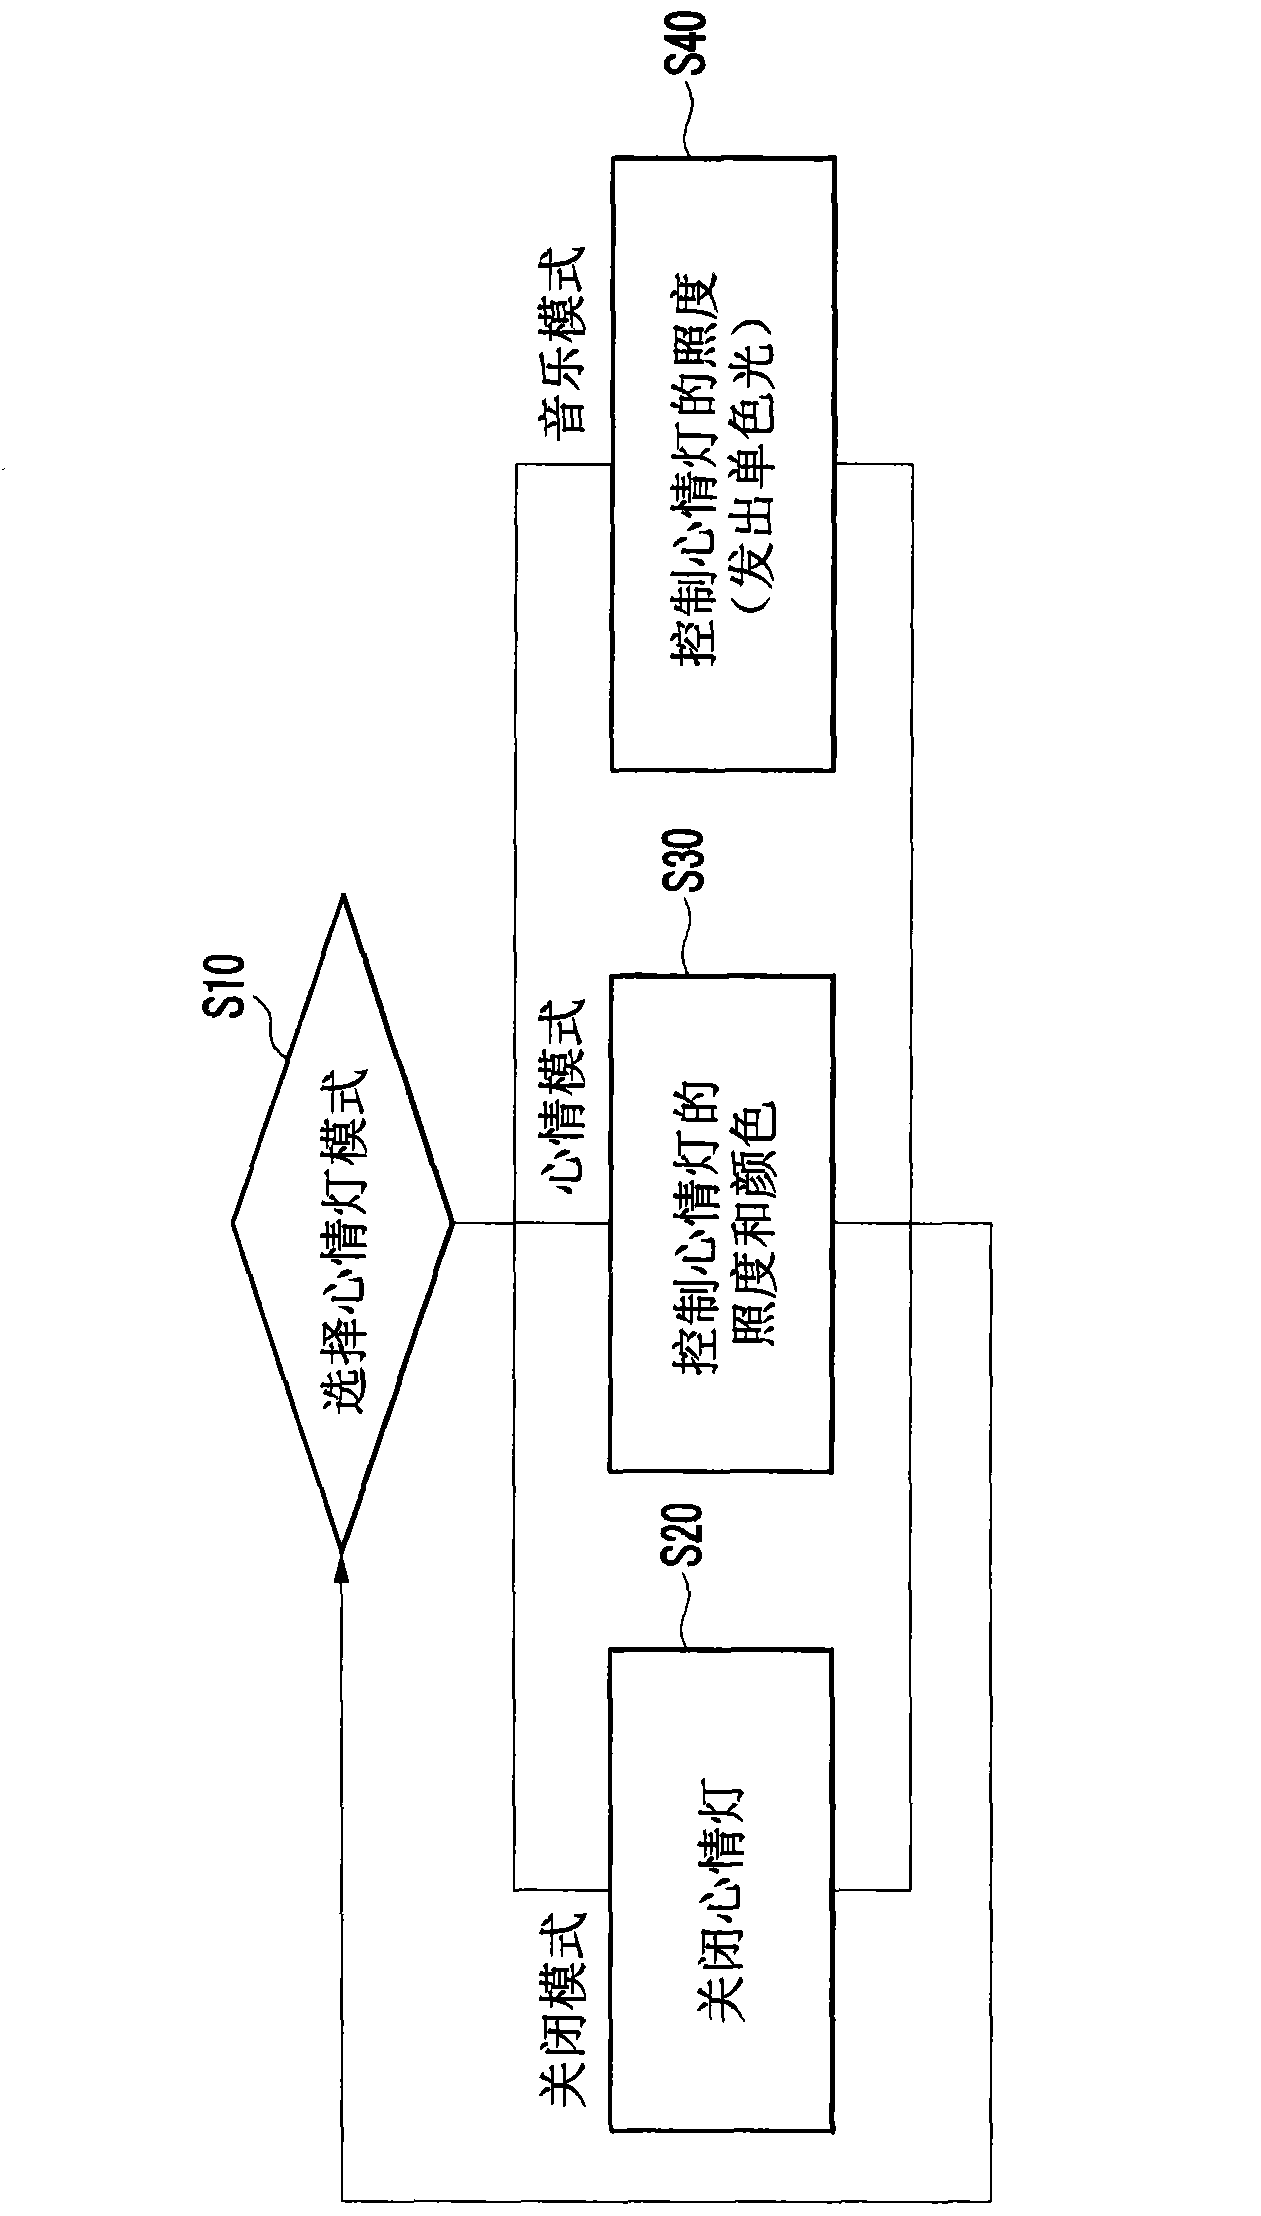 Mood lamp system, method of controlling mood lamp, and mood lamp controlling apparatus